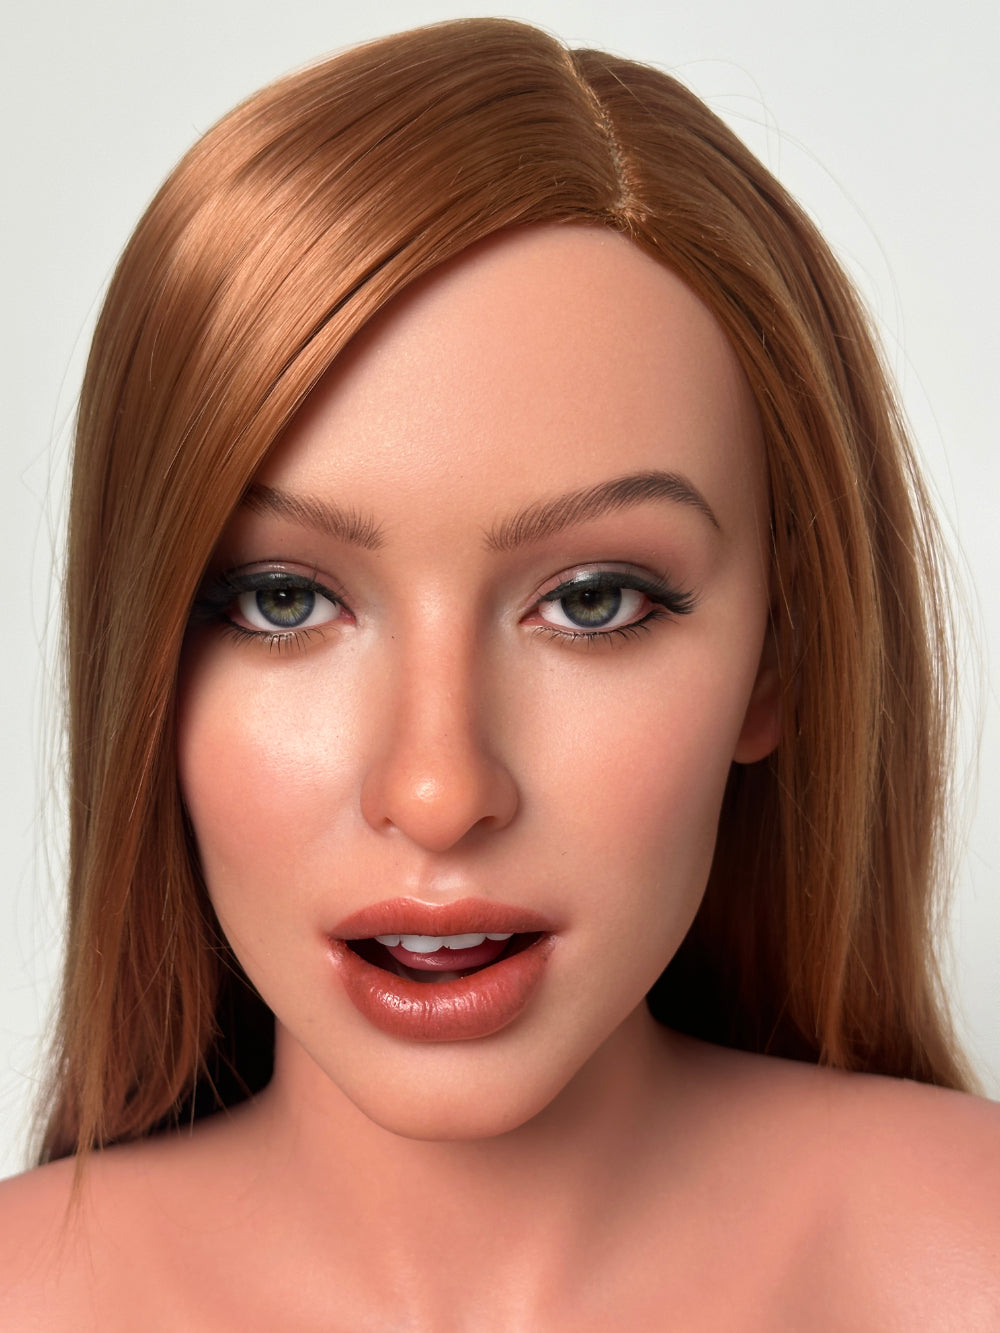 Zelex Doll SLE Series 153 cm B Silicone - ZXE208-2  Movable Jaw